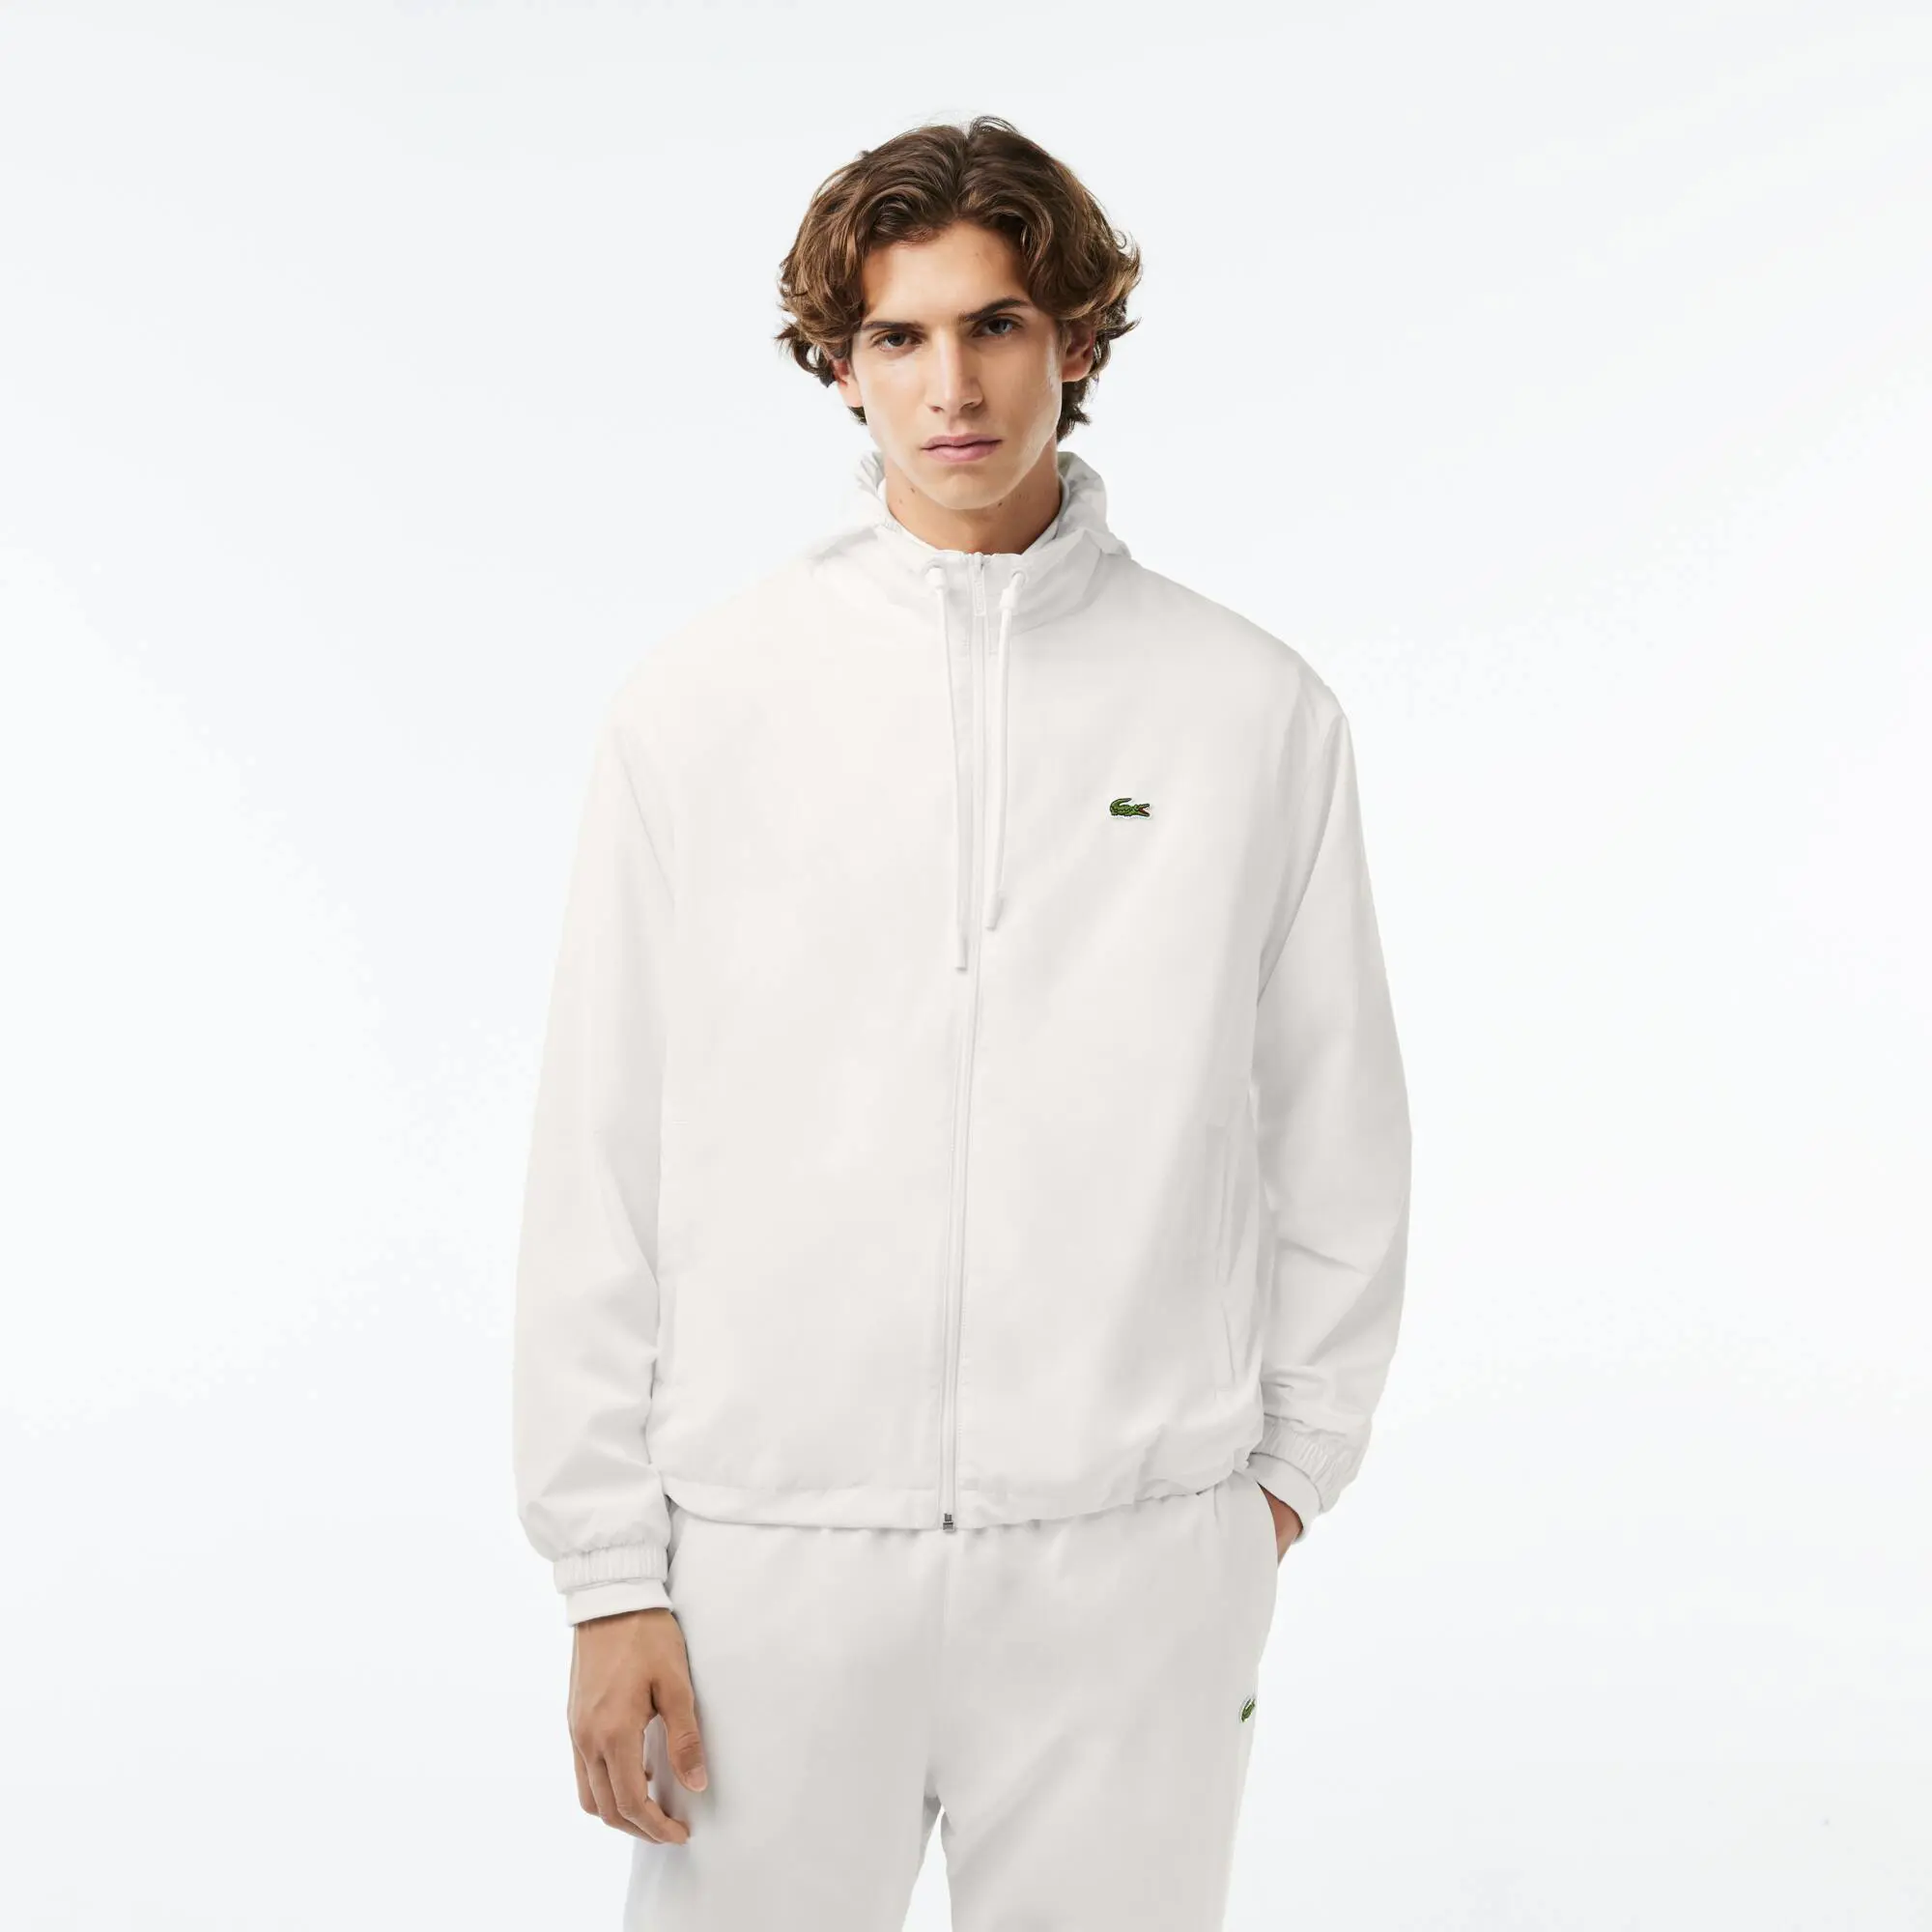 Lacoste Short Water-resistant Sportsuit Jacket with Removable Hood. 1